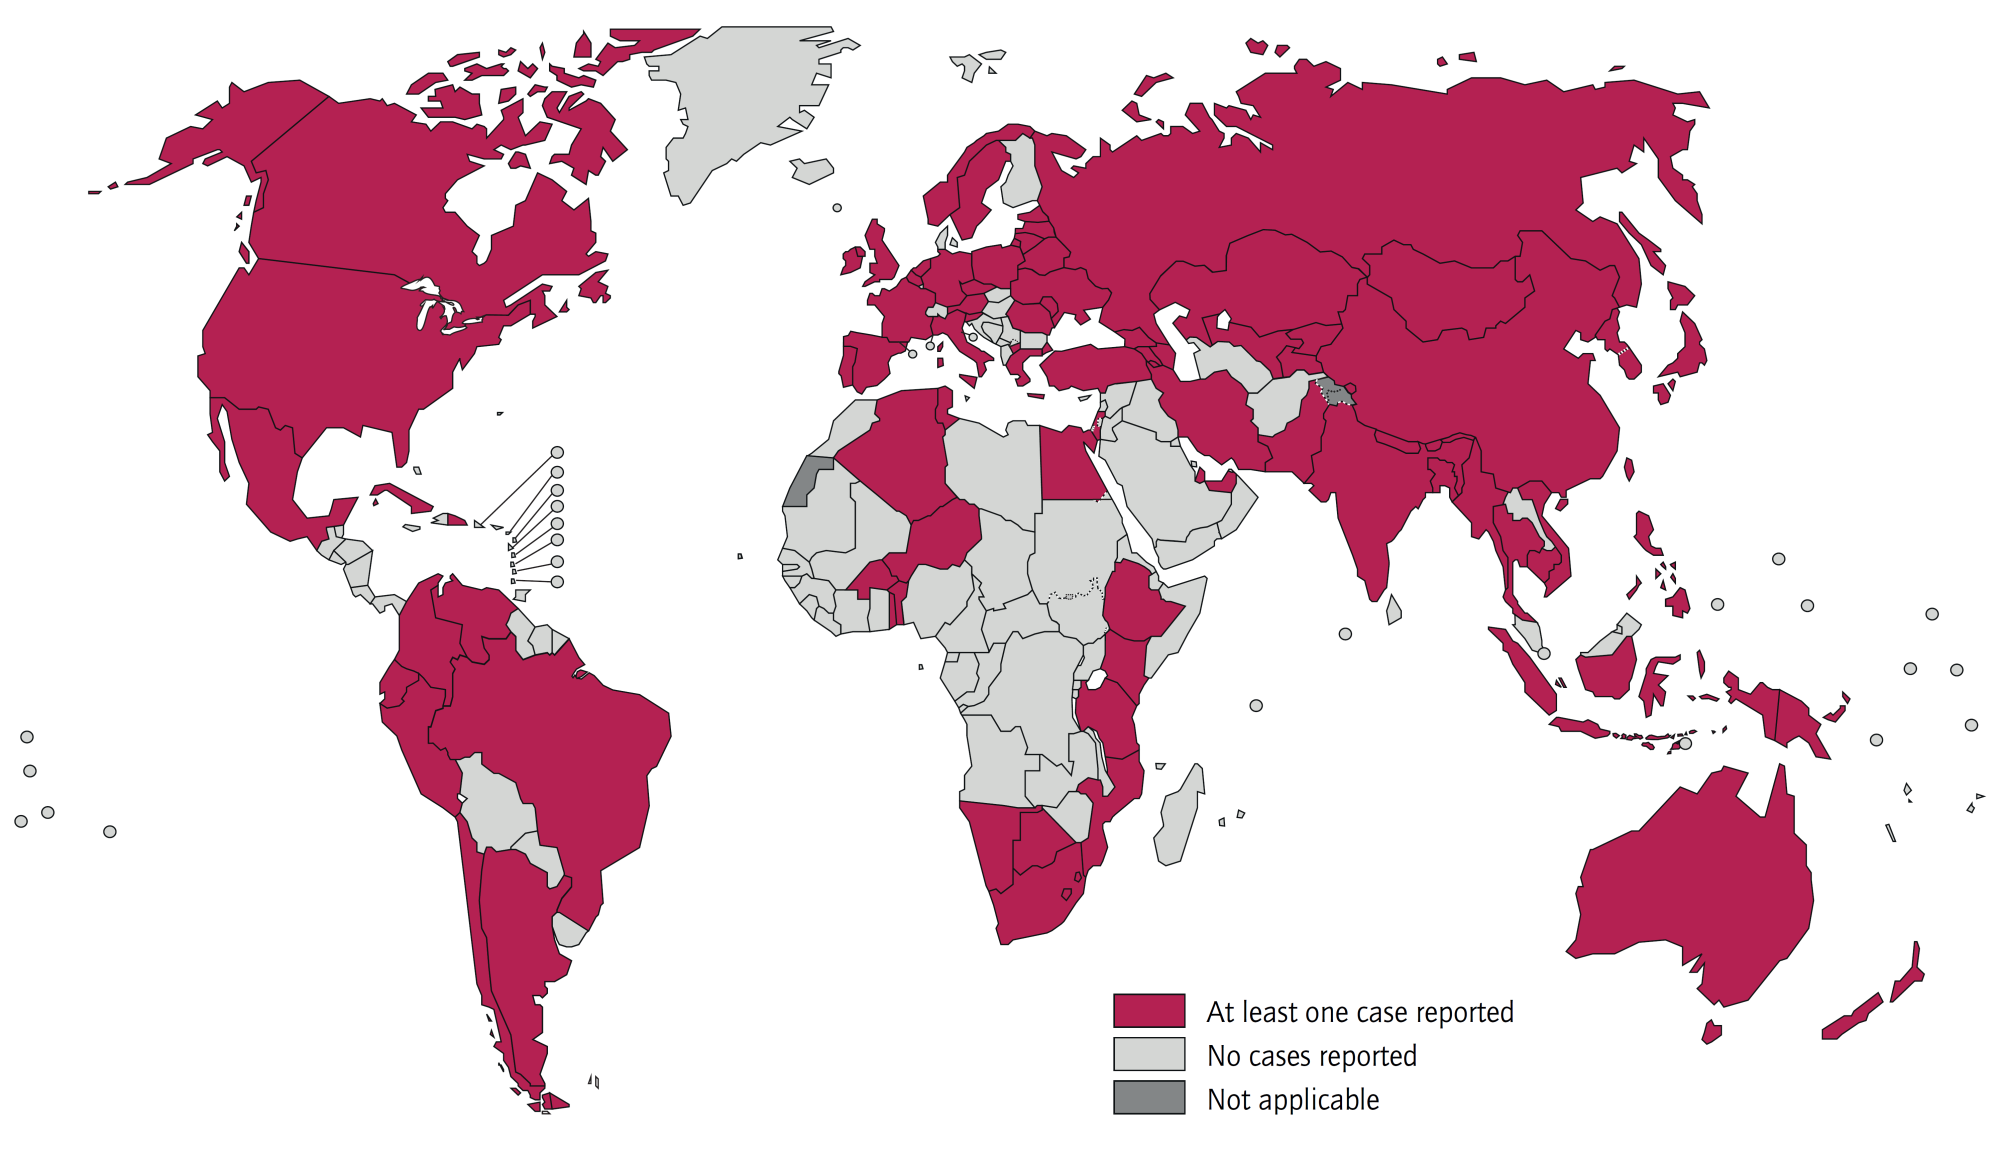 Countries that had reported at